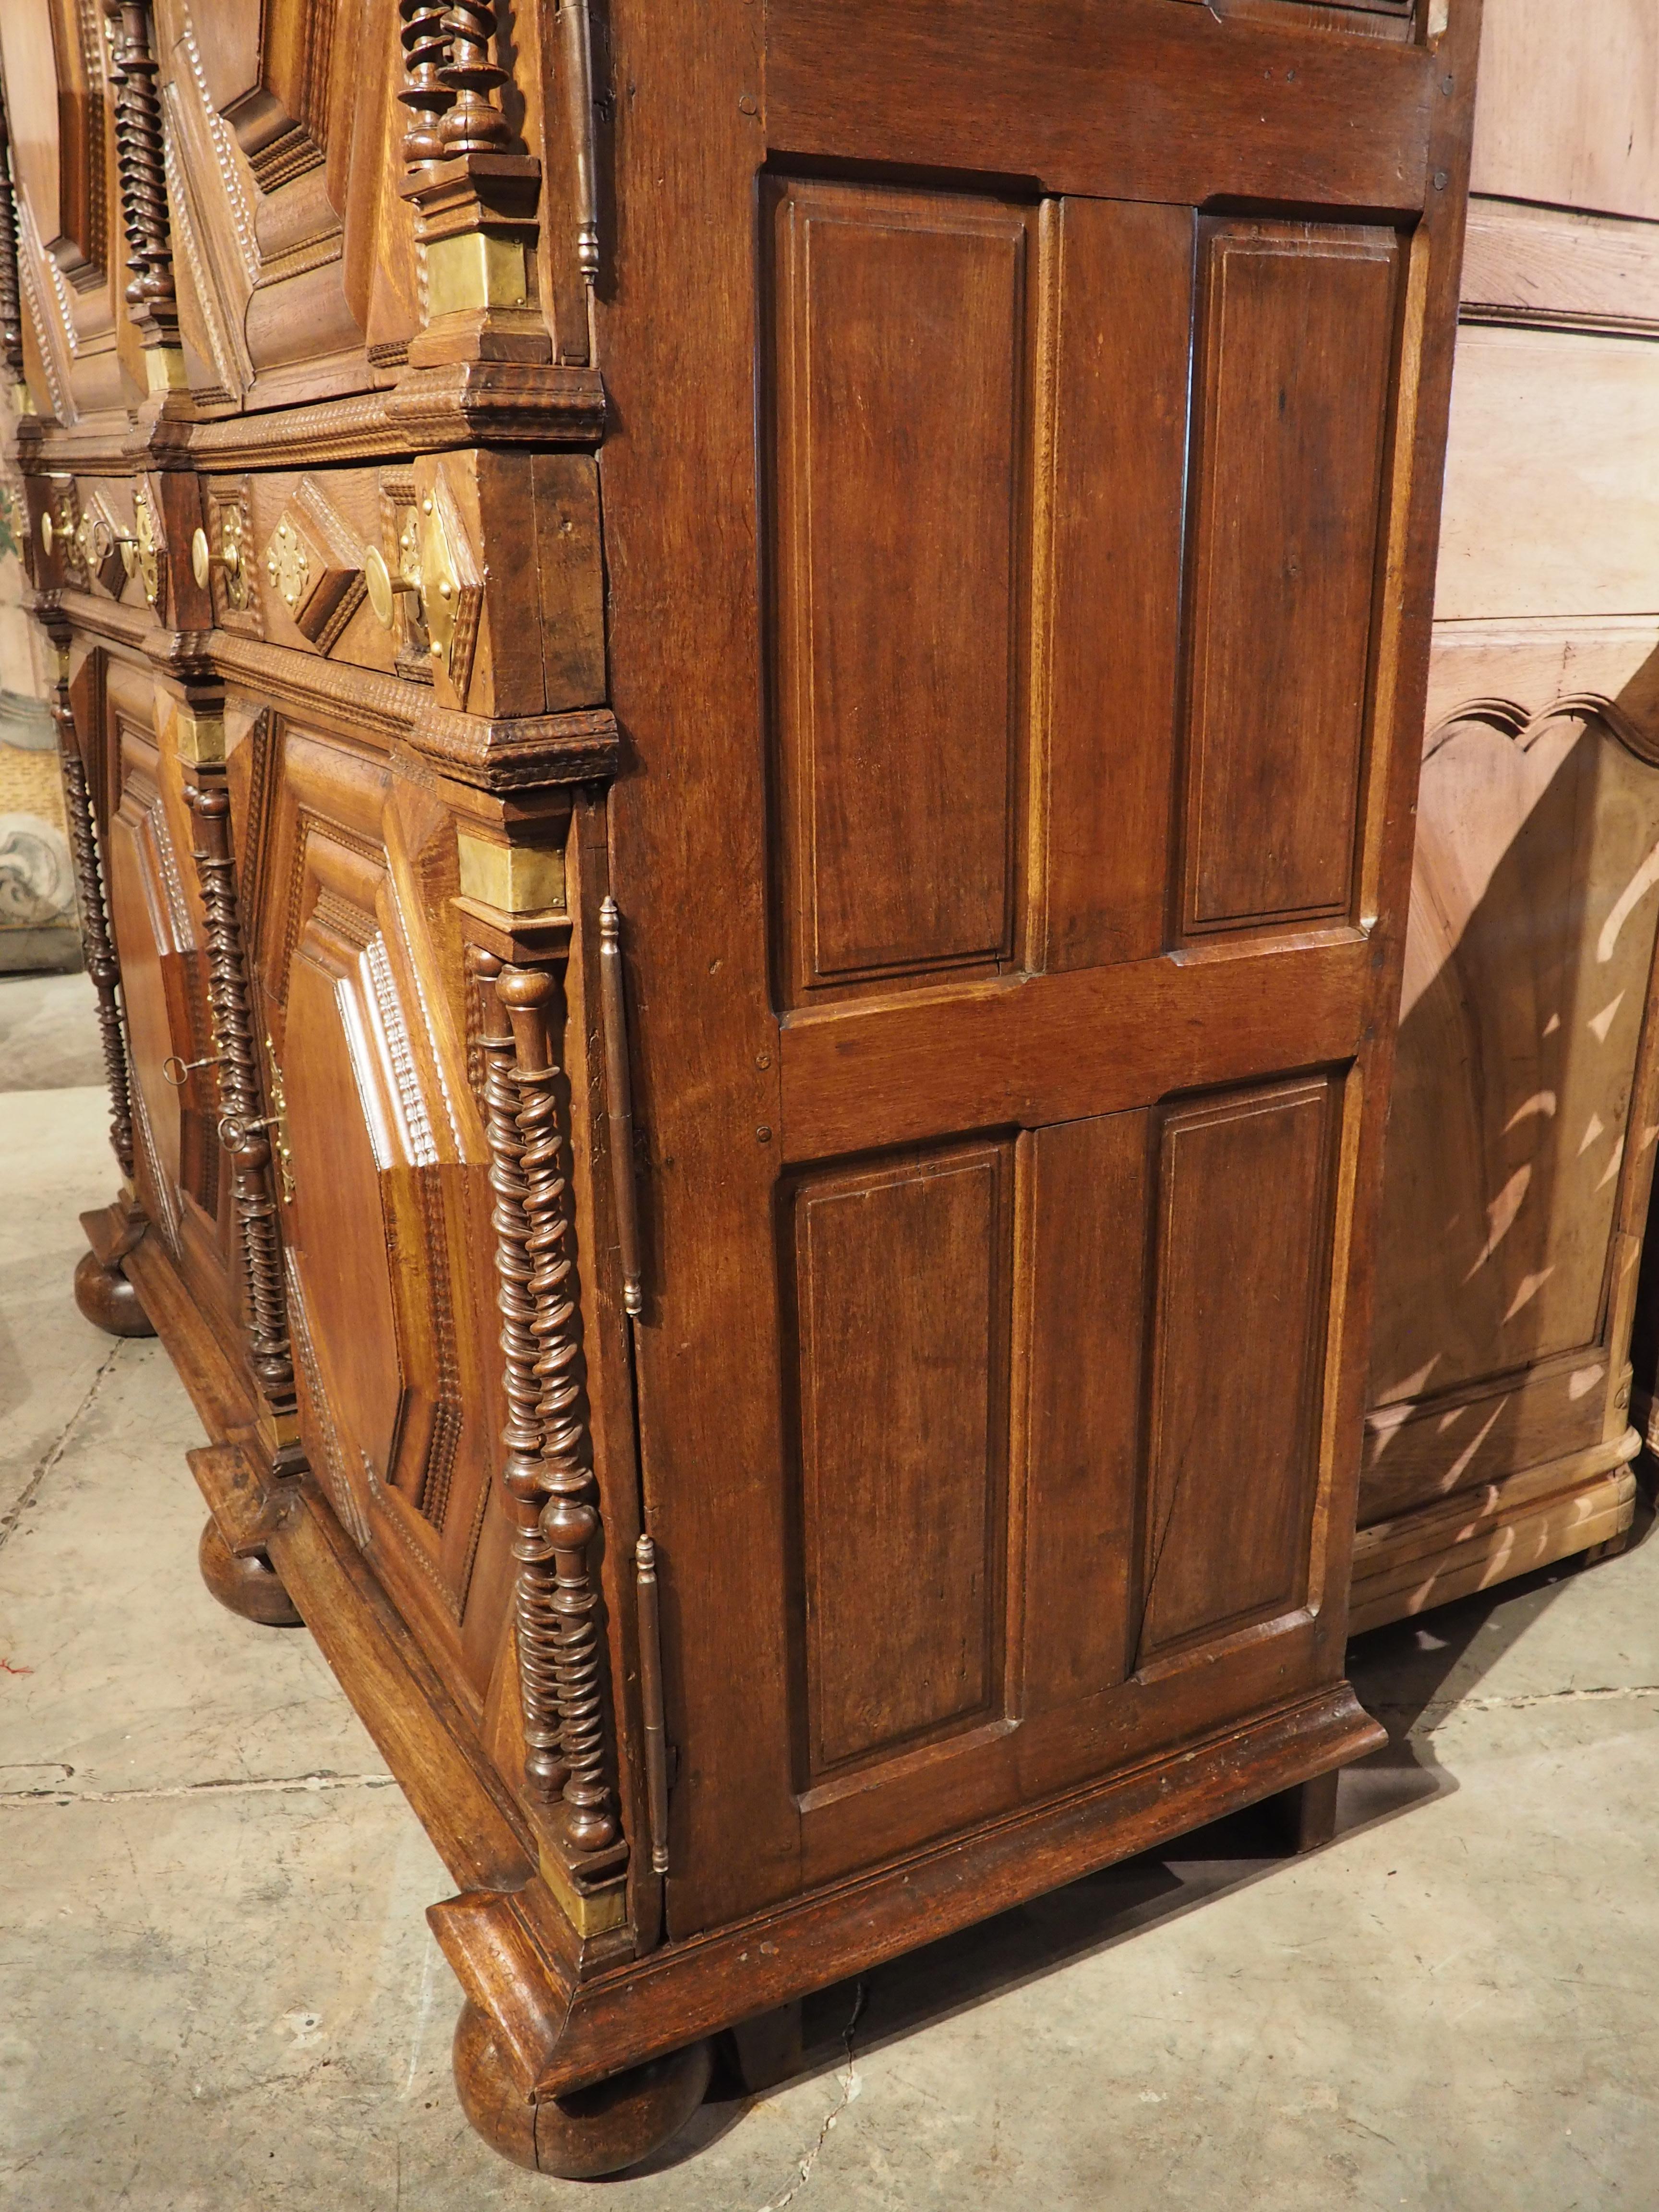 This grand and distinctive piece of furniture from Northern Brittany is known as a “buffet malouin” and was created in the late 17th century. These types of cabinets were created for important homes in the historic port city of Saint-Malo. The